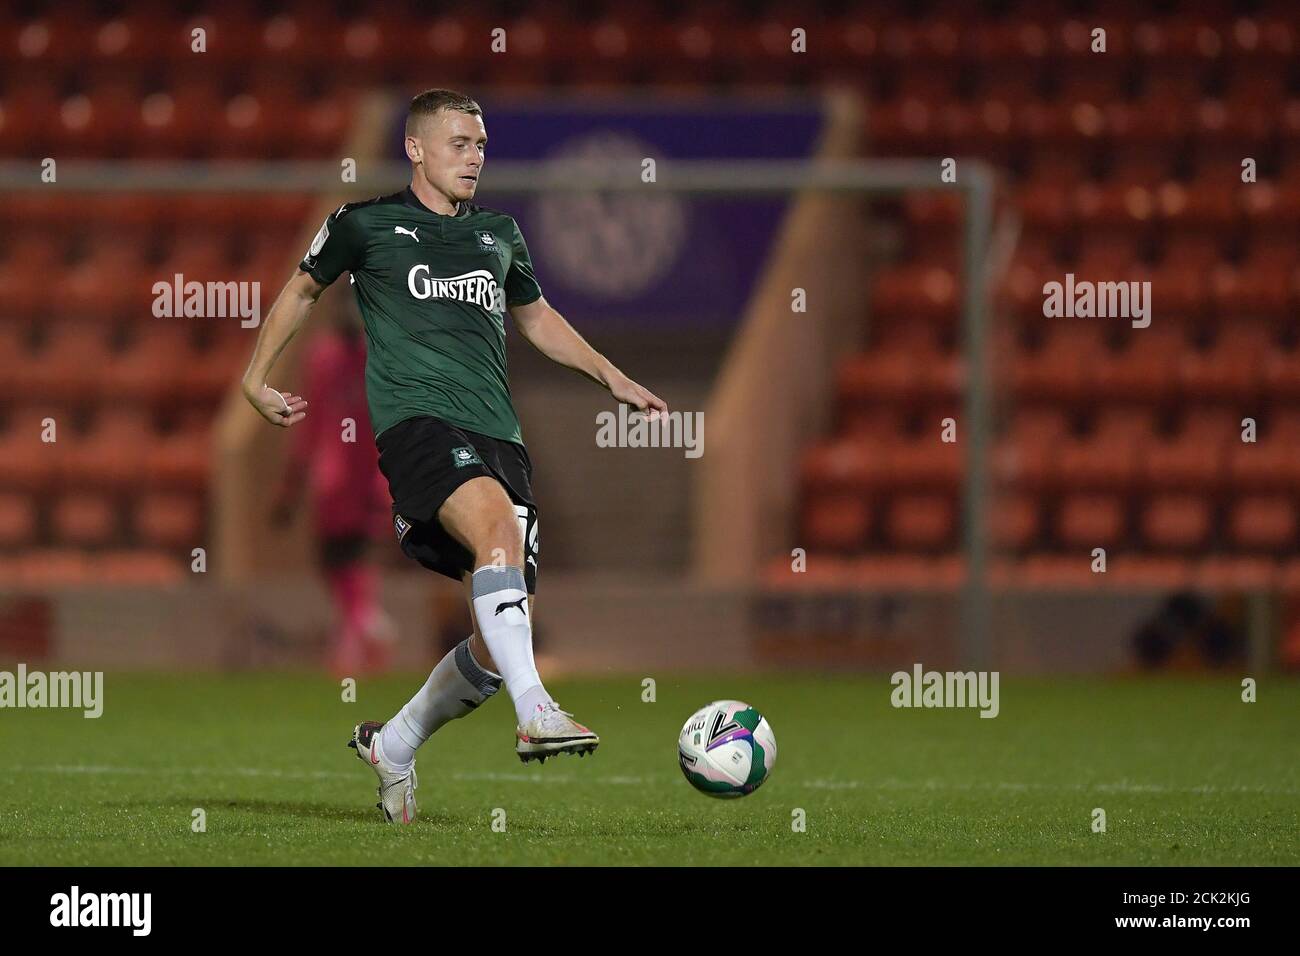 London, UK. 15th Sep, 2020. Byron Moore of Plymouth Argyle during the Carabao Cup second round match between Leyton Orient and Plymouth Argyle at the Matchroom Stadium, London, England on 15 September 2020. Photo by Vince Mignott/PRiME Media Images. Credit: PRiME Media Images/Alamy Live News Stock Photo